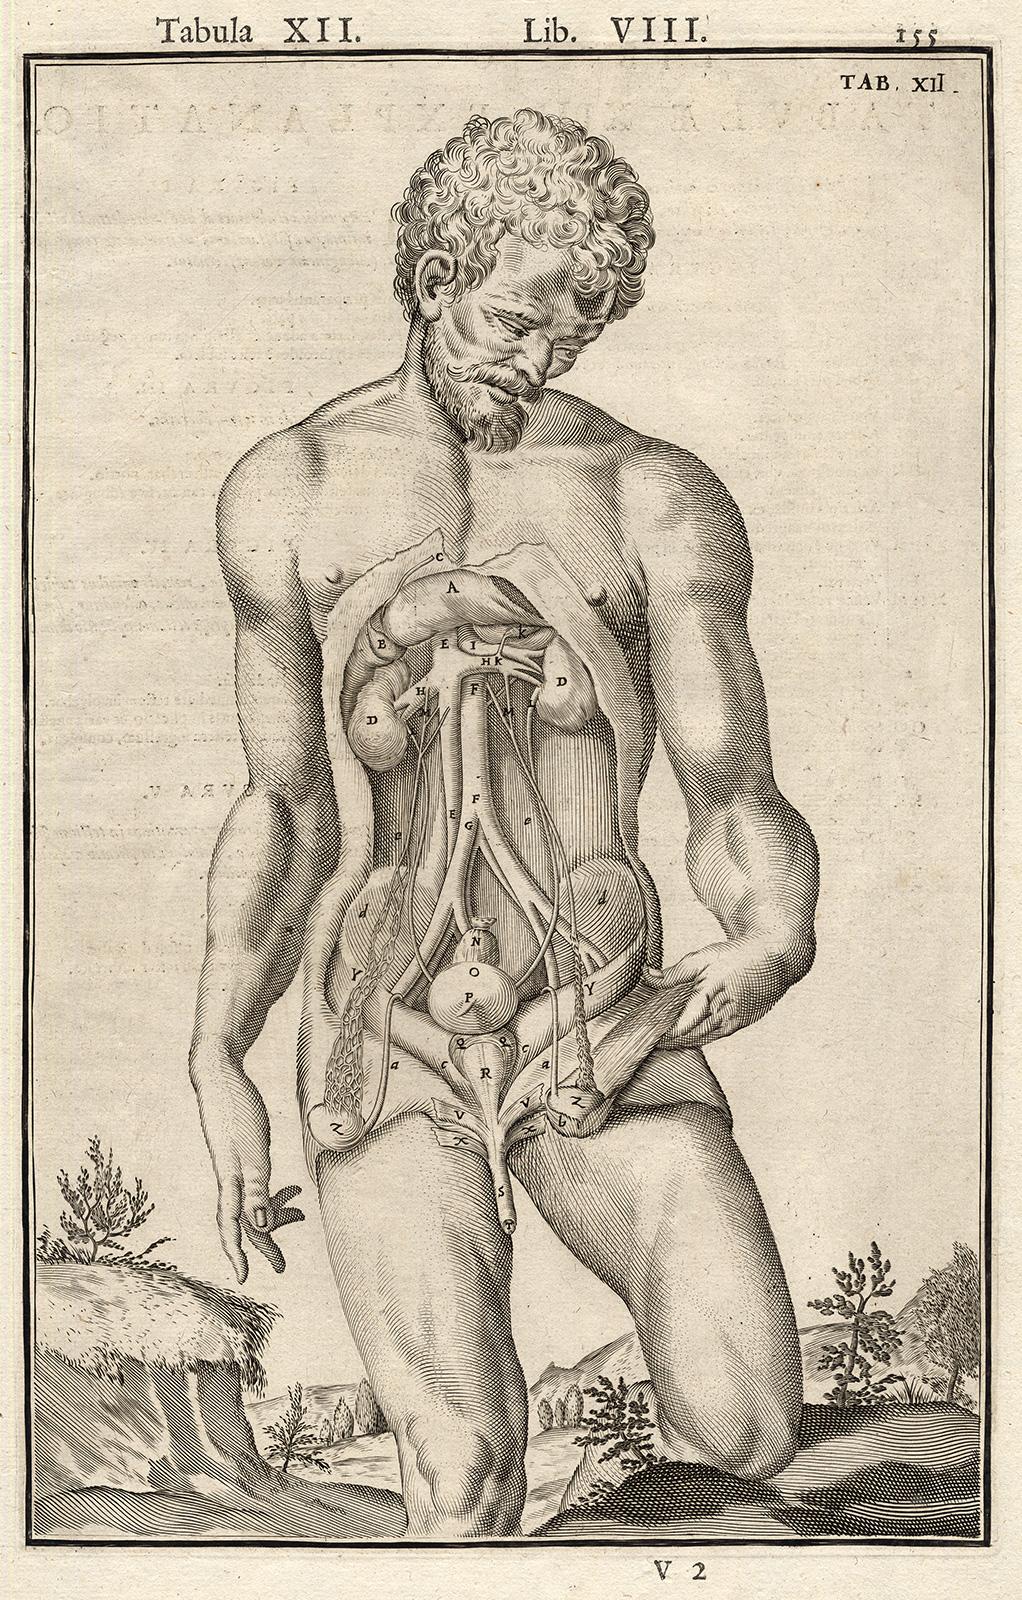 Subject: Very rare anatomical print. Plate, Lib. VIII, Tab. XI-XII. Set of 2 plates, showing portraits of standing naked men, from the knee up. The stomachs of both men have been opened, revealing the organs in the abdominal cavity - spleen, liver,